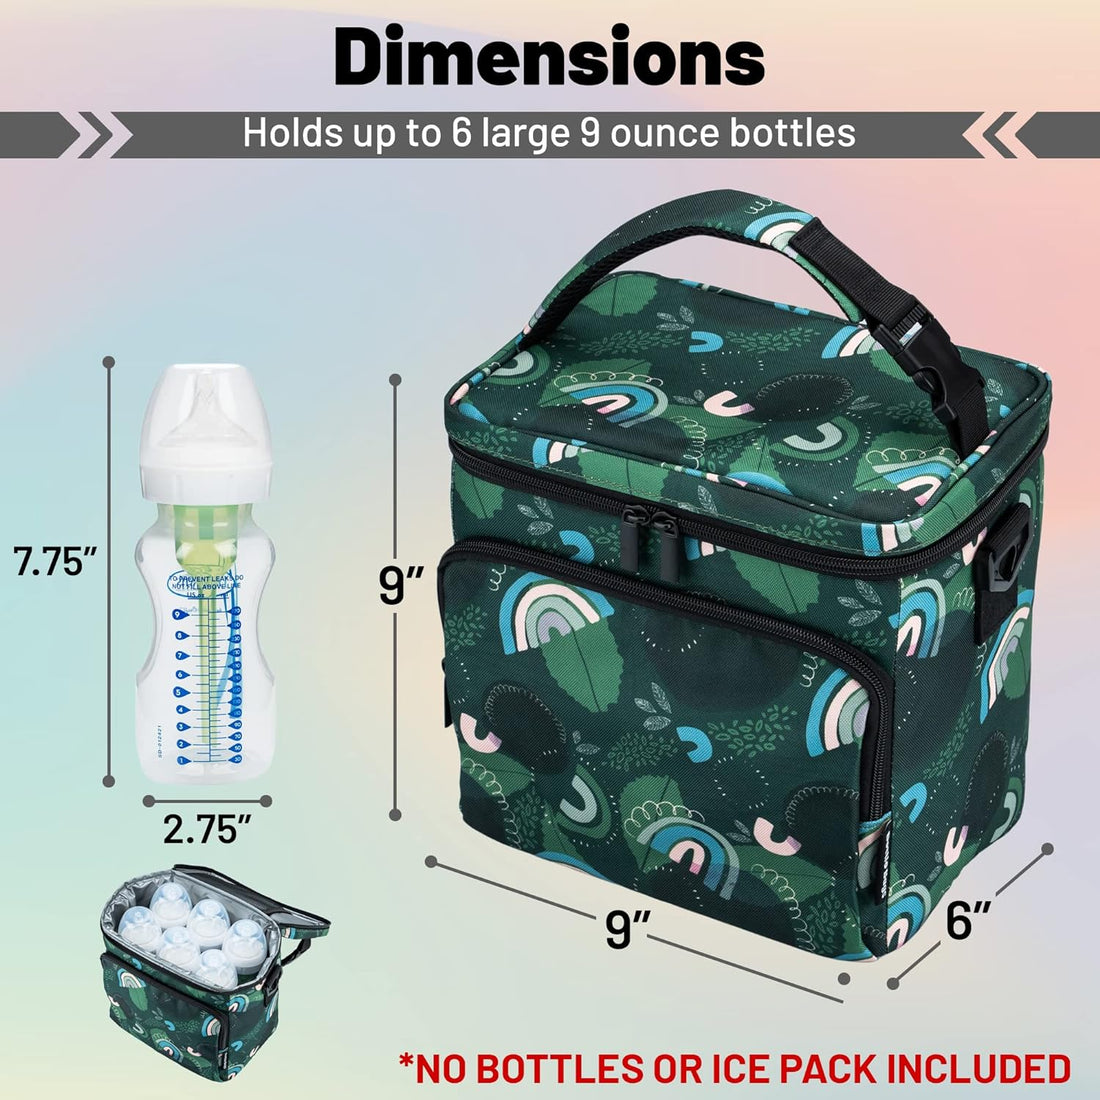 Insulated Breastmilk Cooler Bag With 3 Pockets - Waterproof Baby Bottle Cooler Bag Can Hold 6 Large 9 Ounce Bottles - The Perfect Tote Bottle Bag For Daycare, Nursing Moms, Travel - Green Rainbows